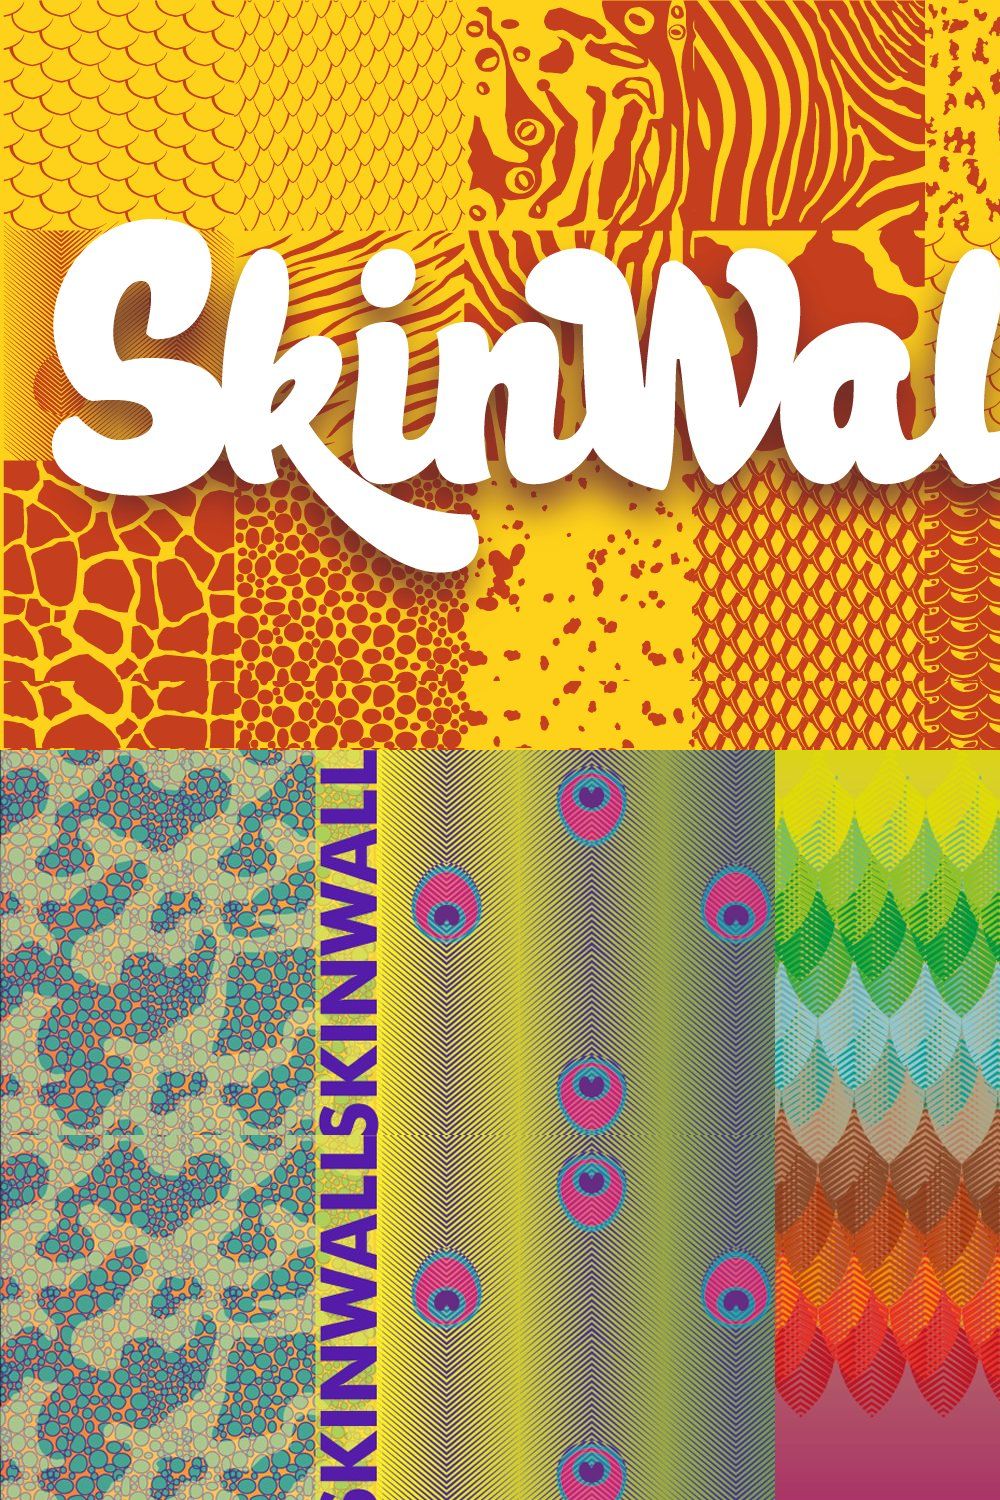 Skinwall pinterest preview image.